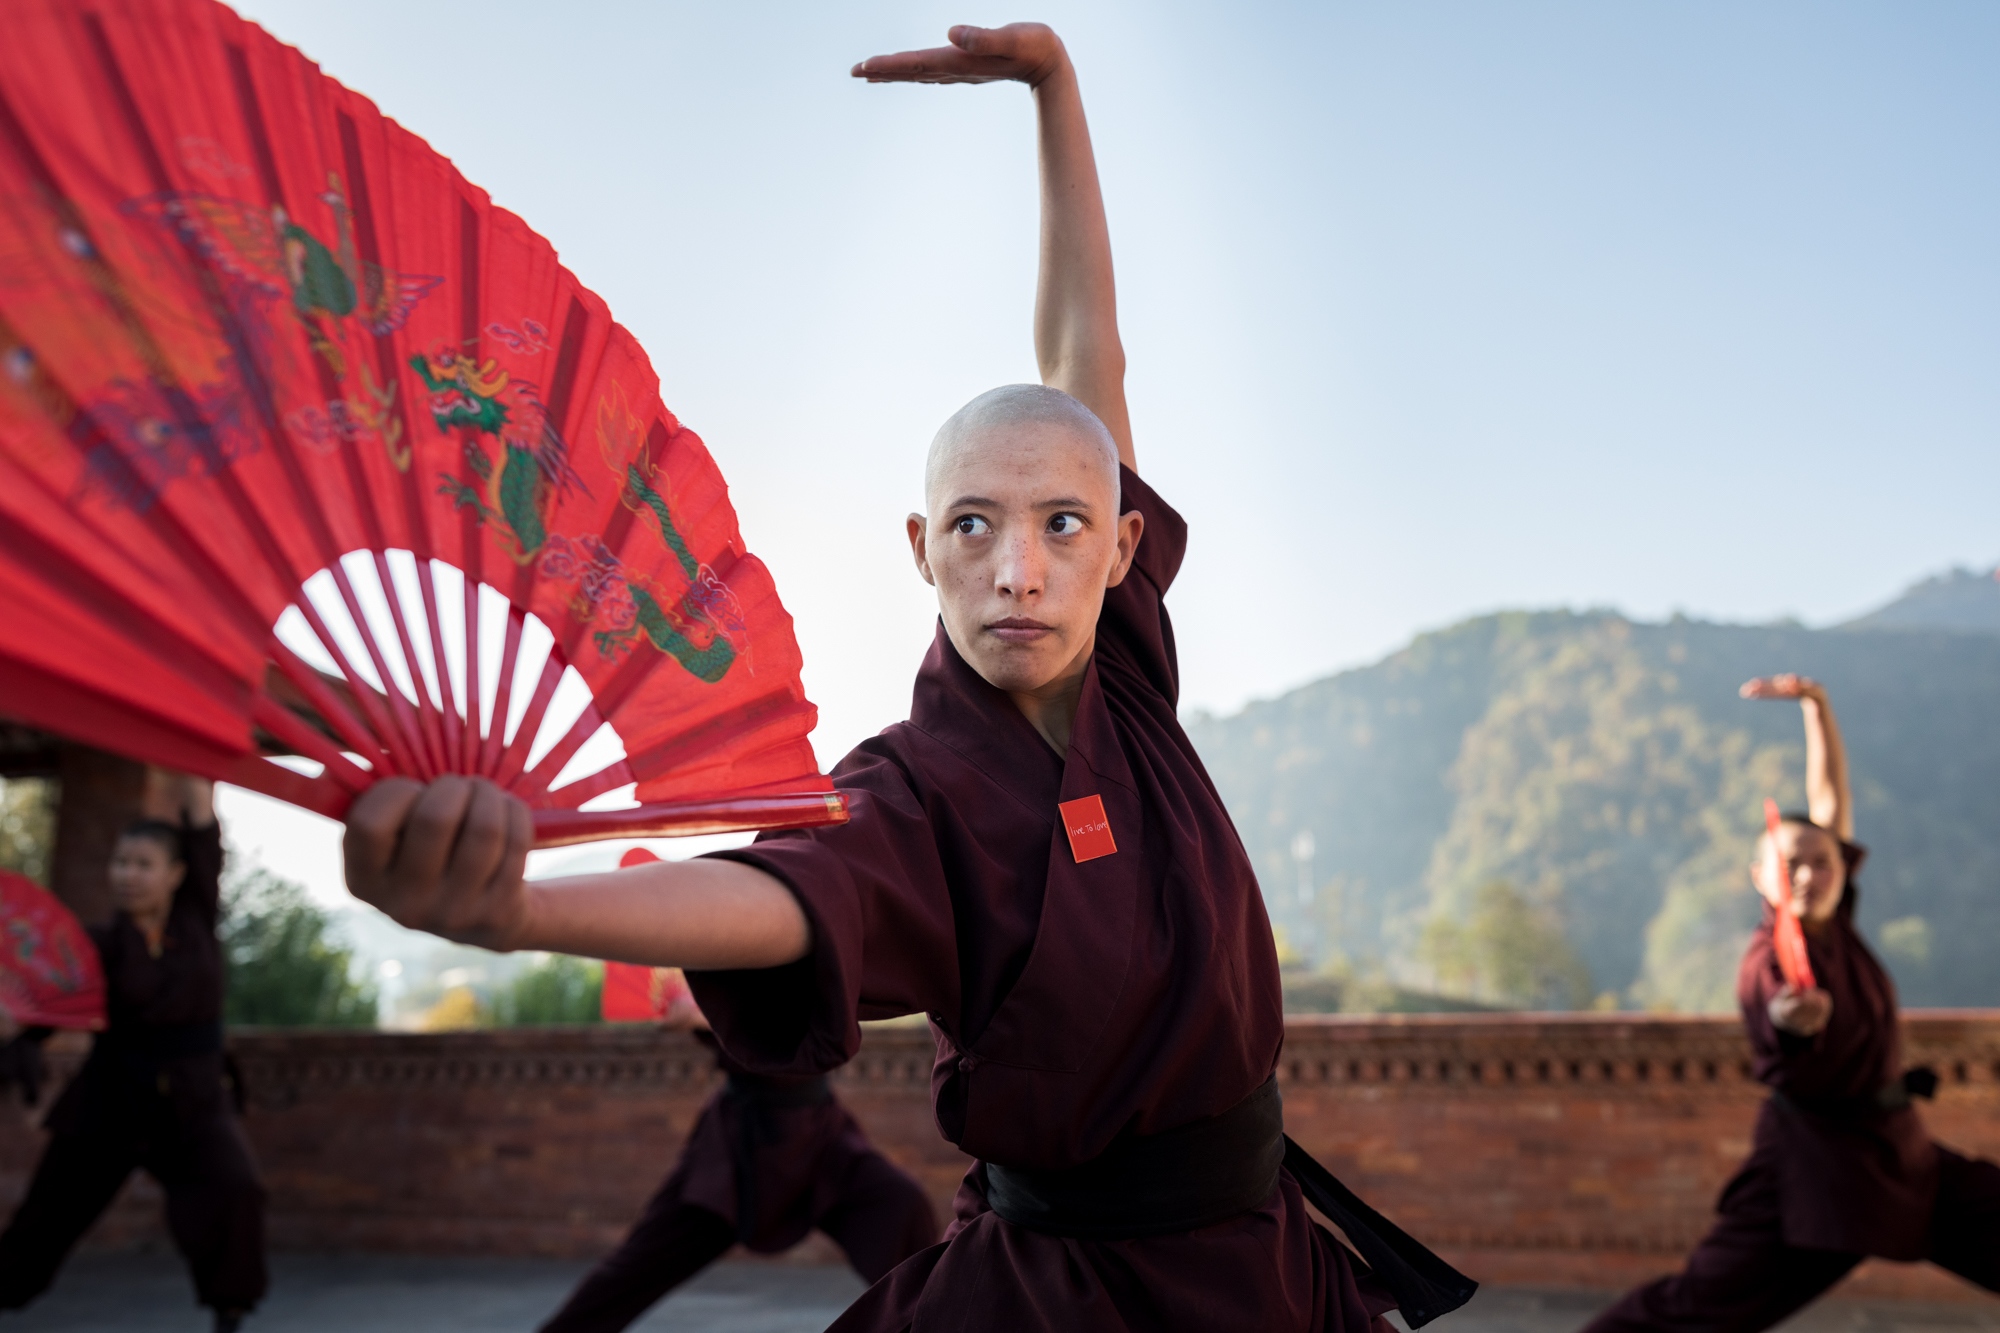 PERSONAL - THE KUNG FU NUNS OF THE HIMALAYAS 